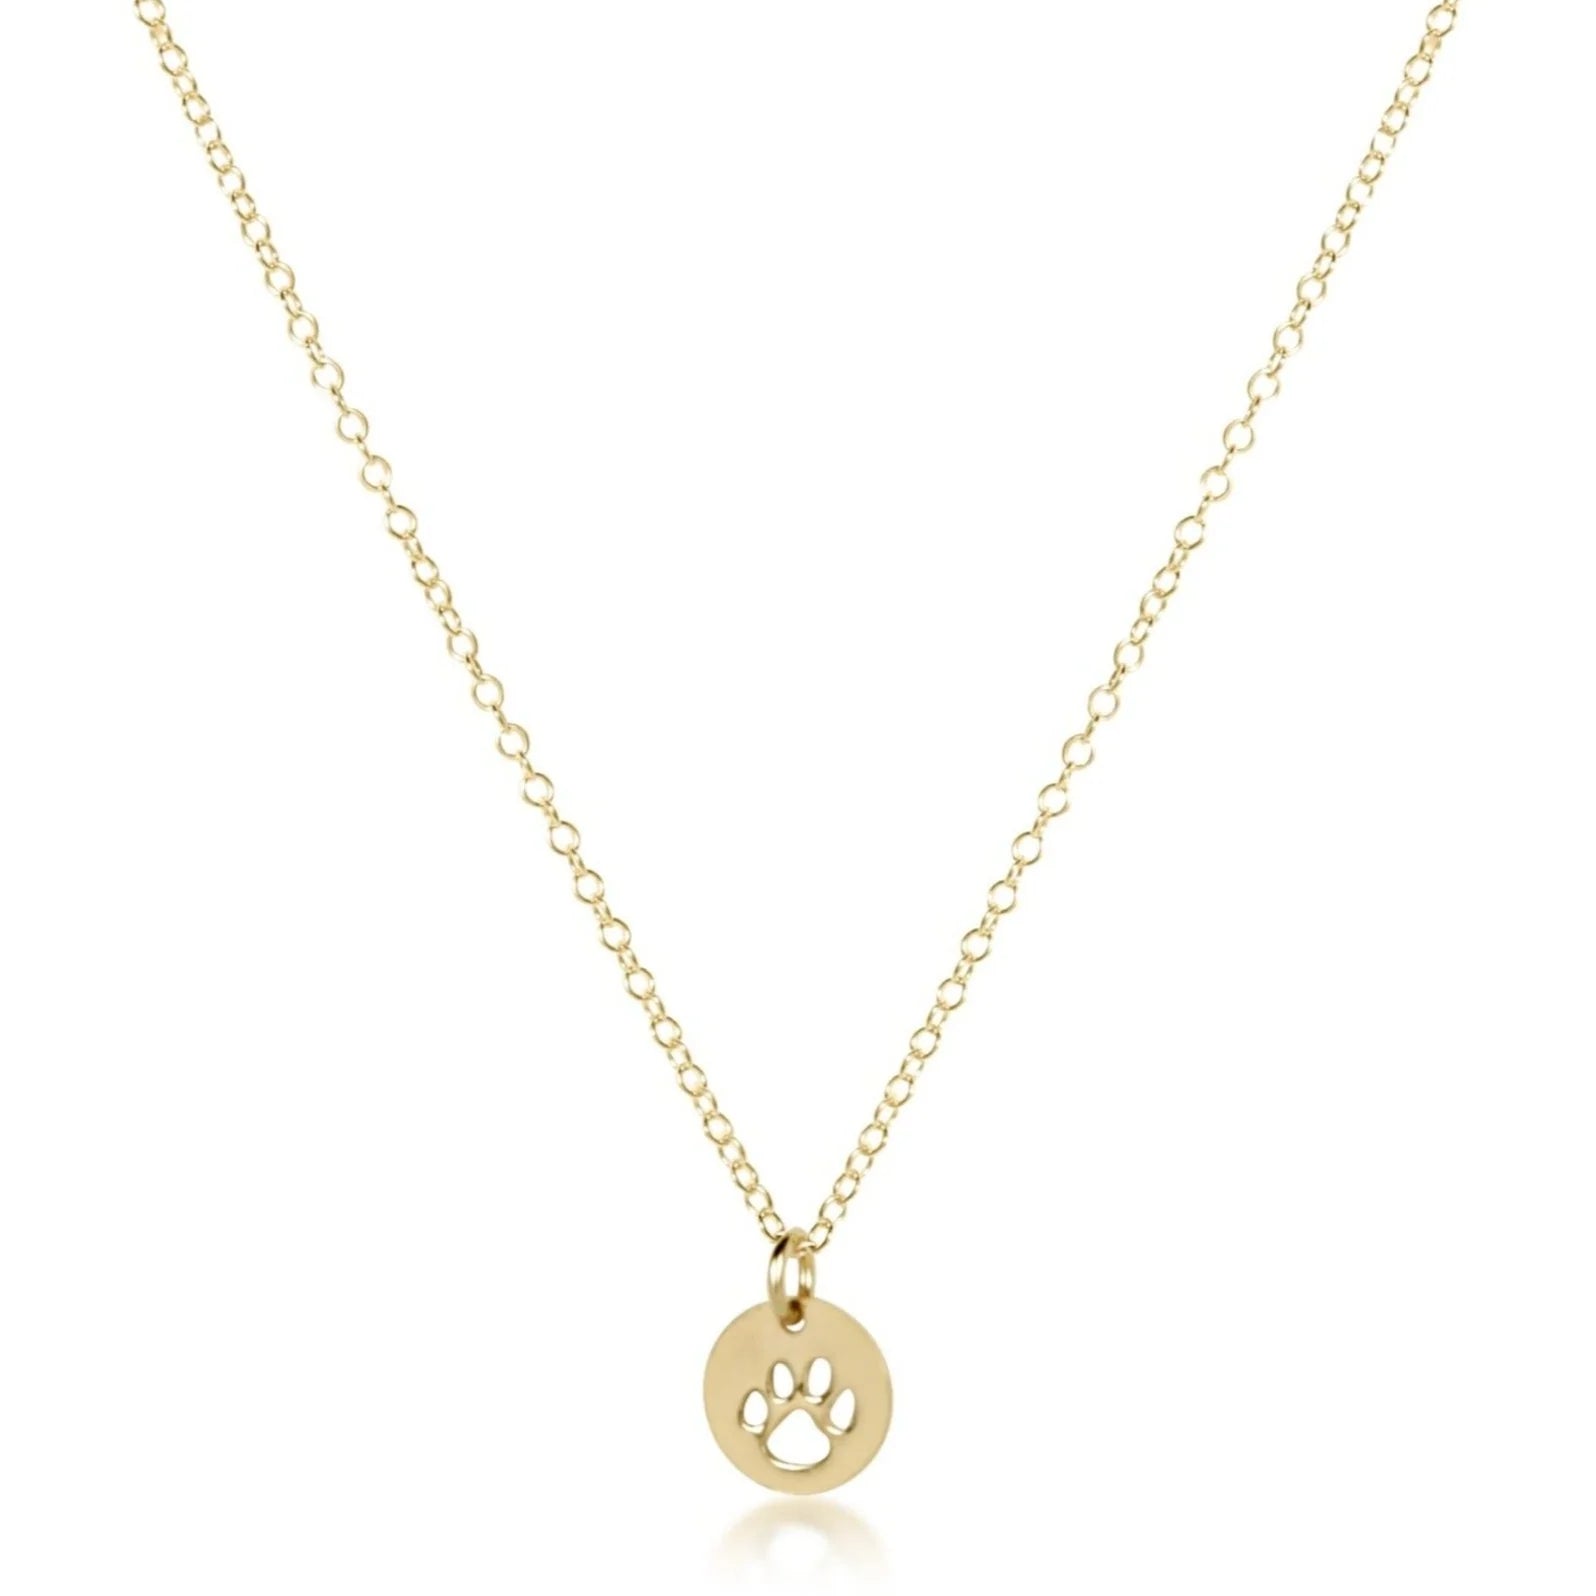 16" Paw Print Small Gold Disc Necklace